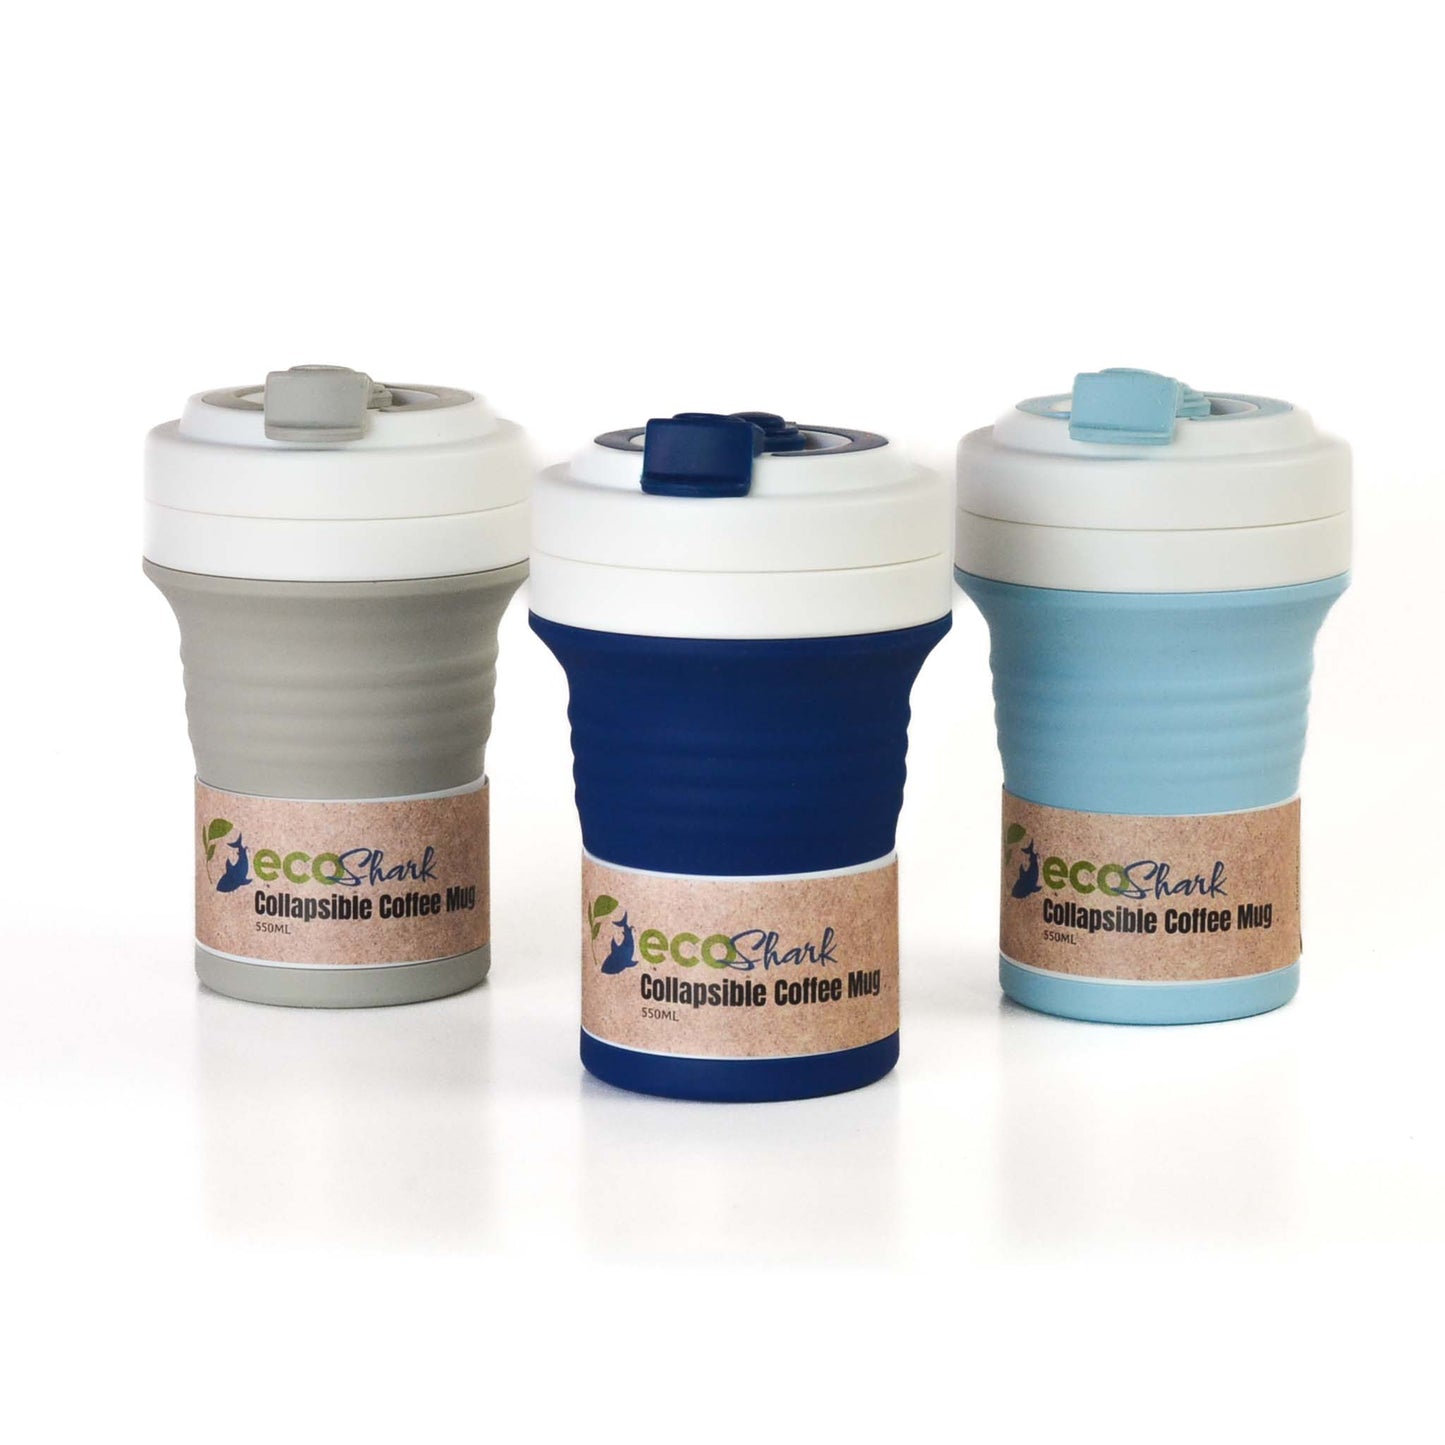 eco shark's reusable collapsible coffee cups